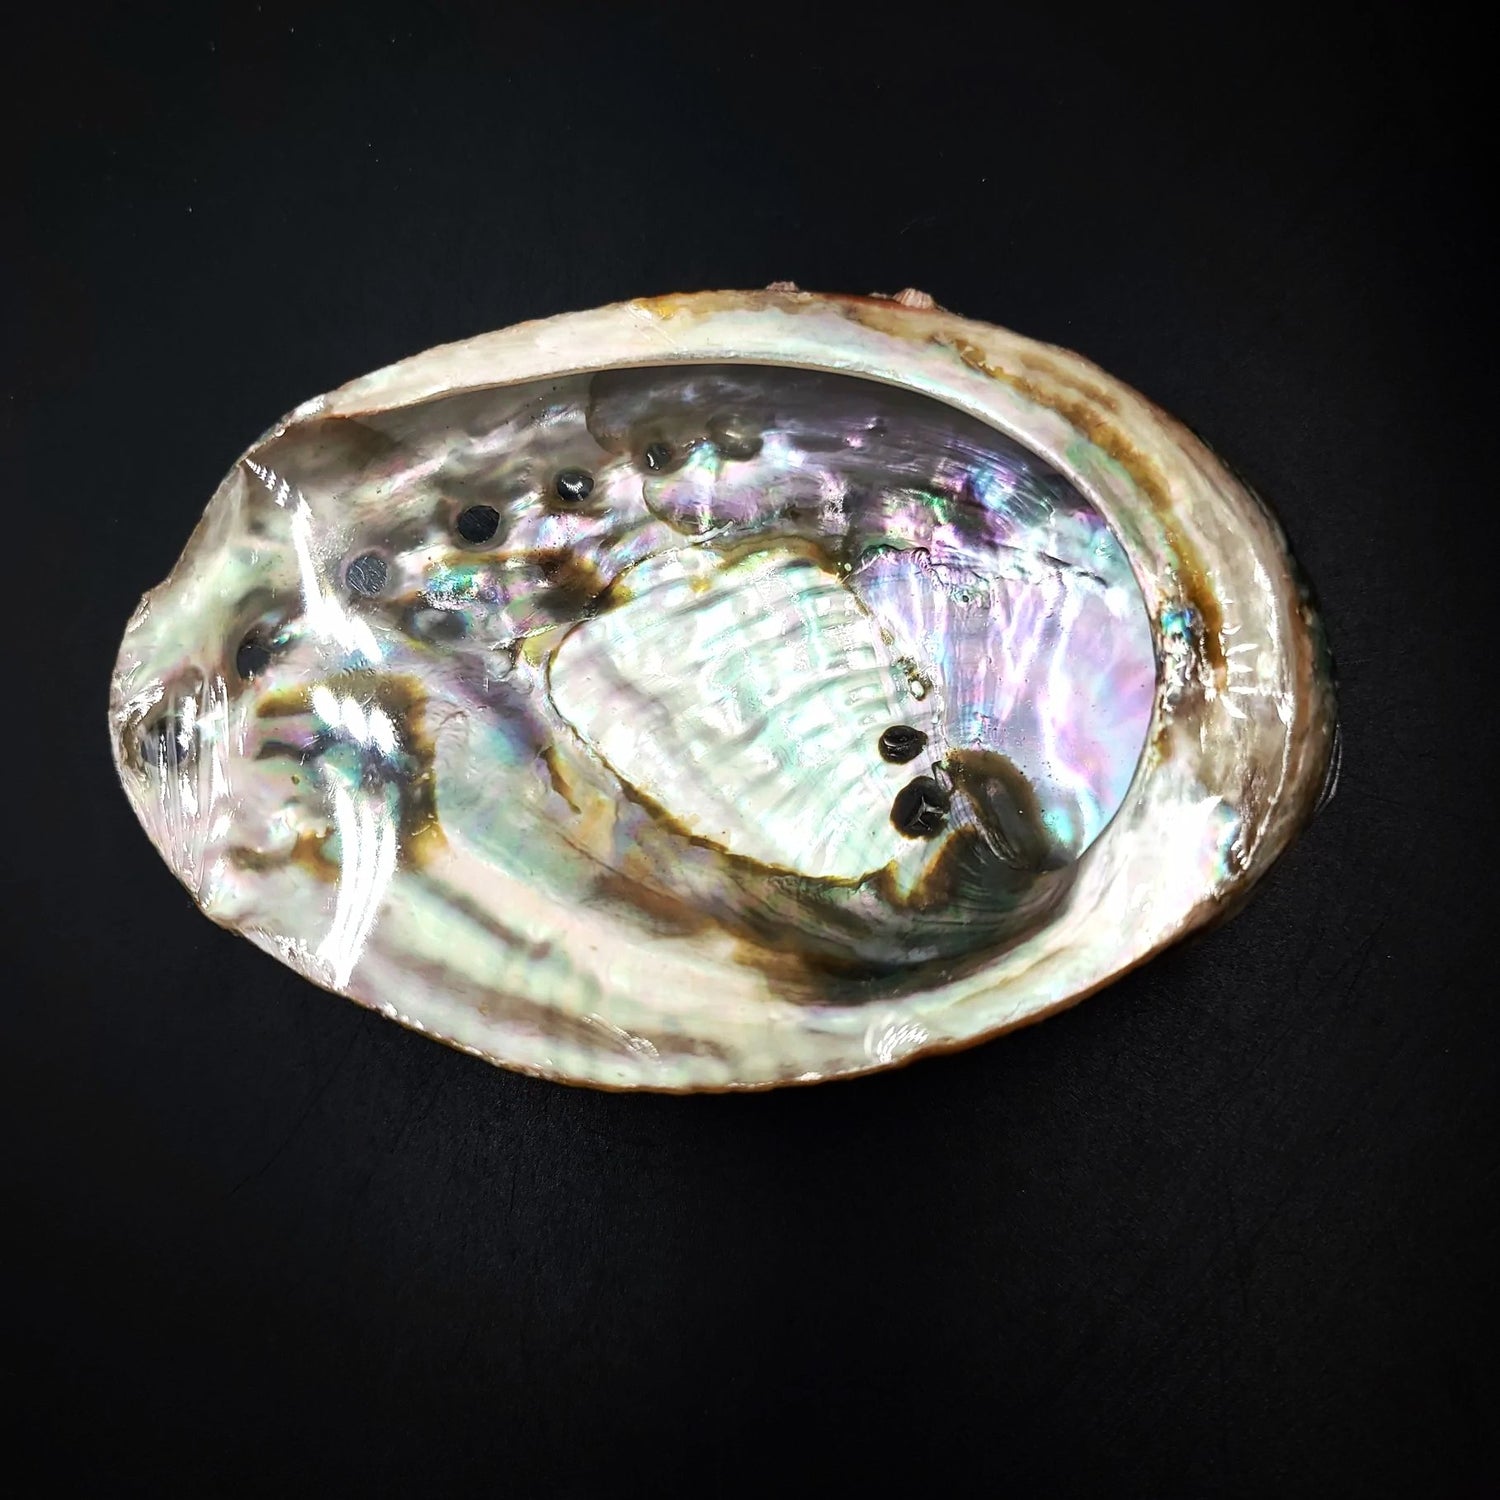 Abalone Shell 4-5" - Elevated Metaphysical